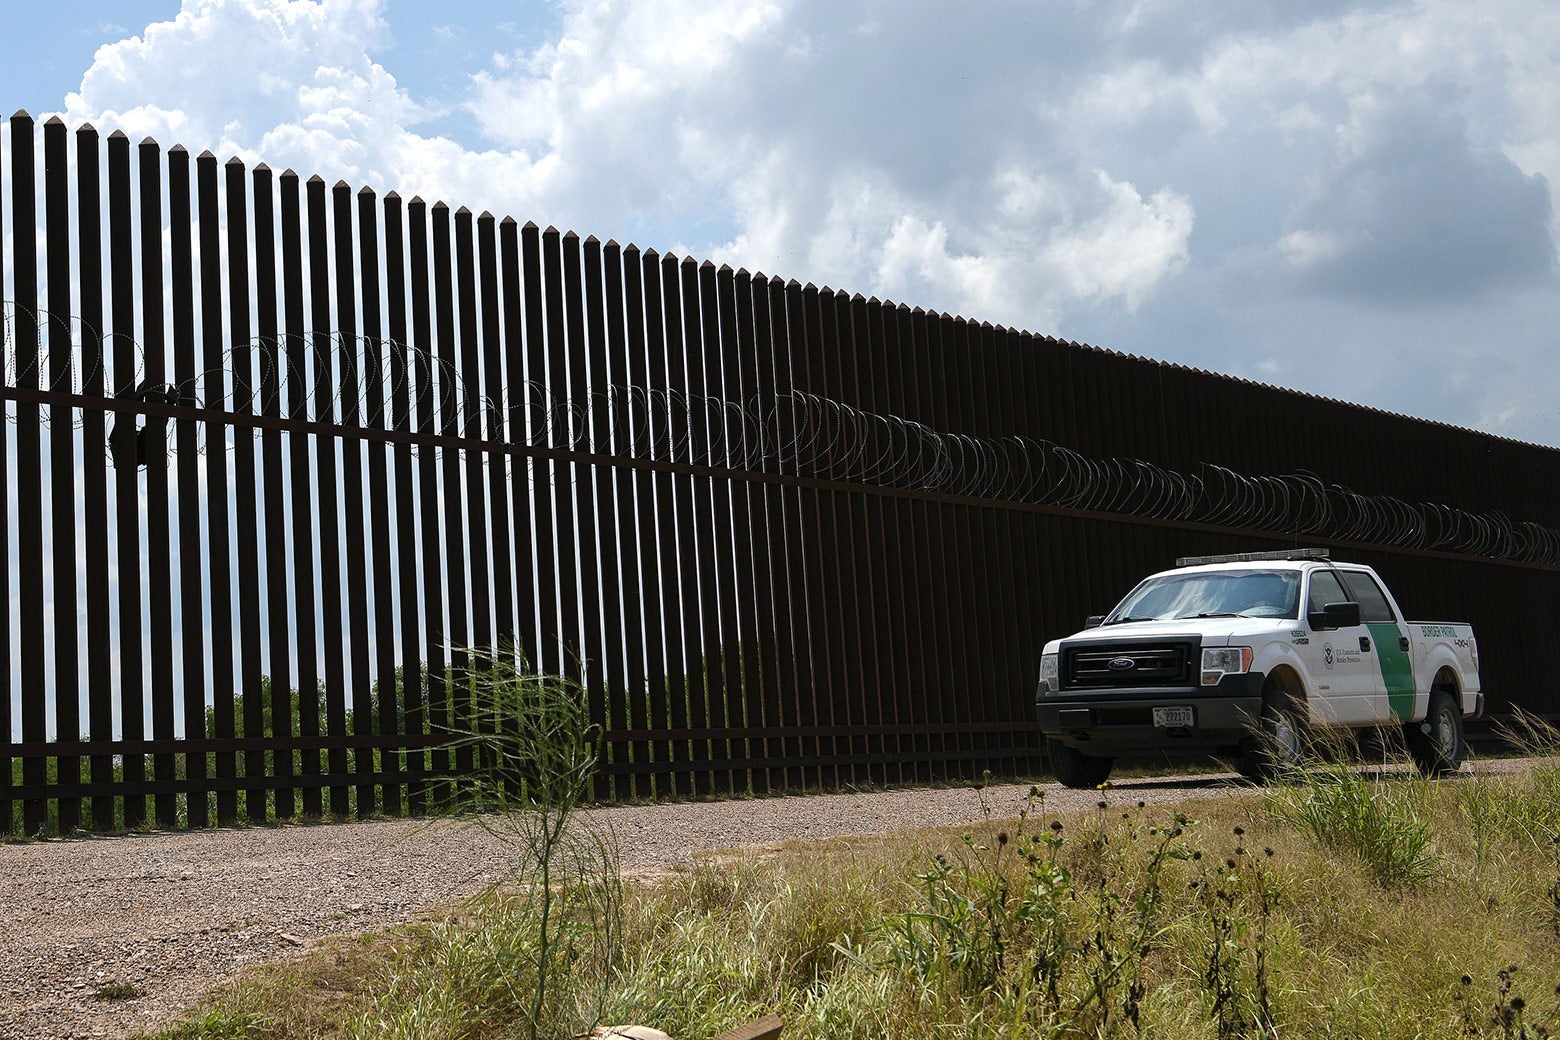 A Border Patrol vehicle drives along a section of border fence near the U.S.-Mexico border on June 12 in Hidalgo, Texas.